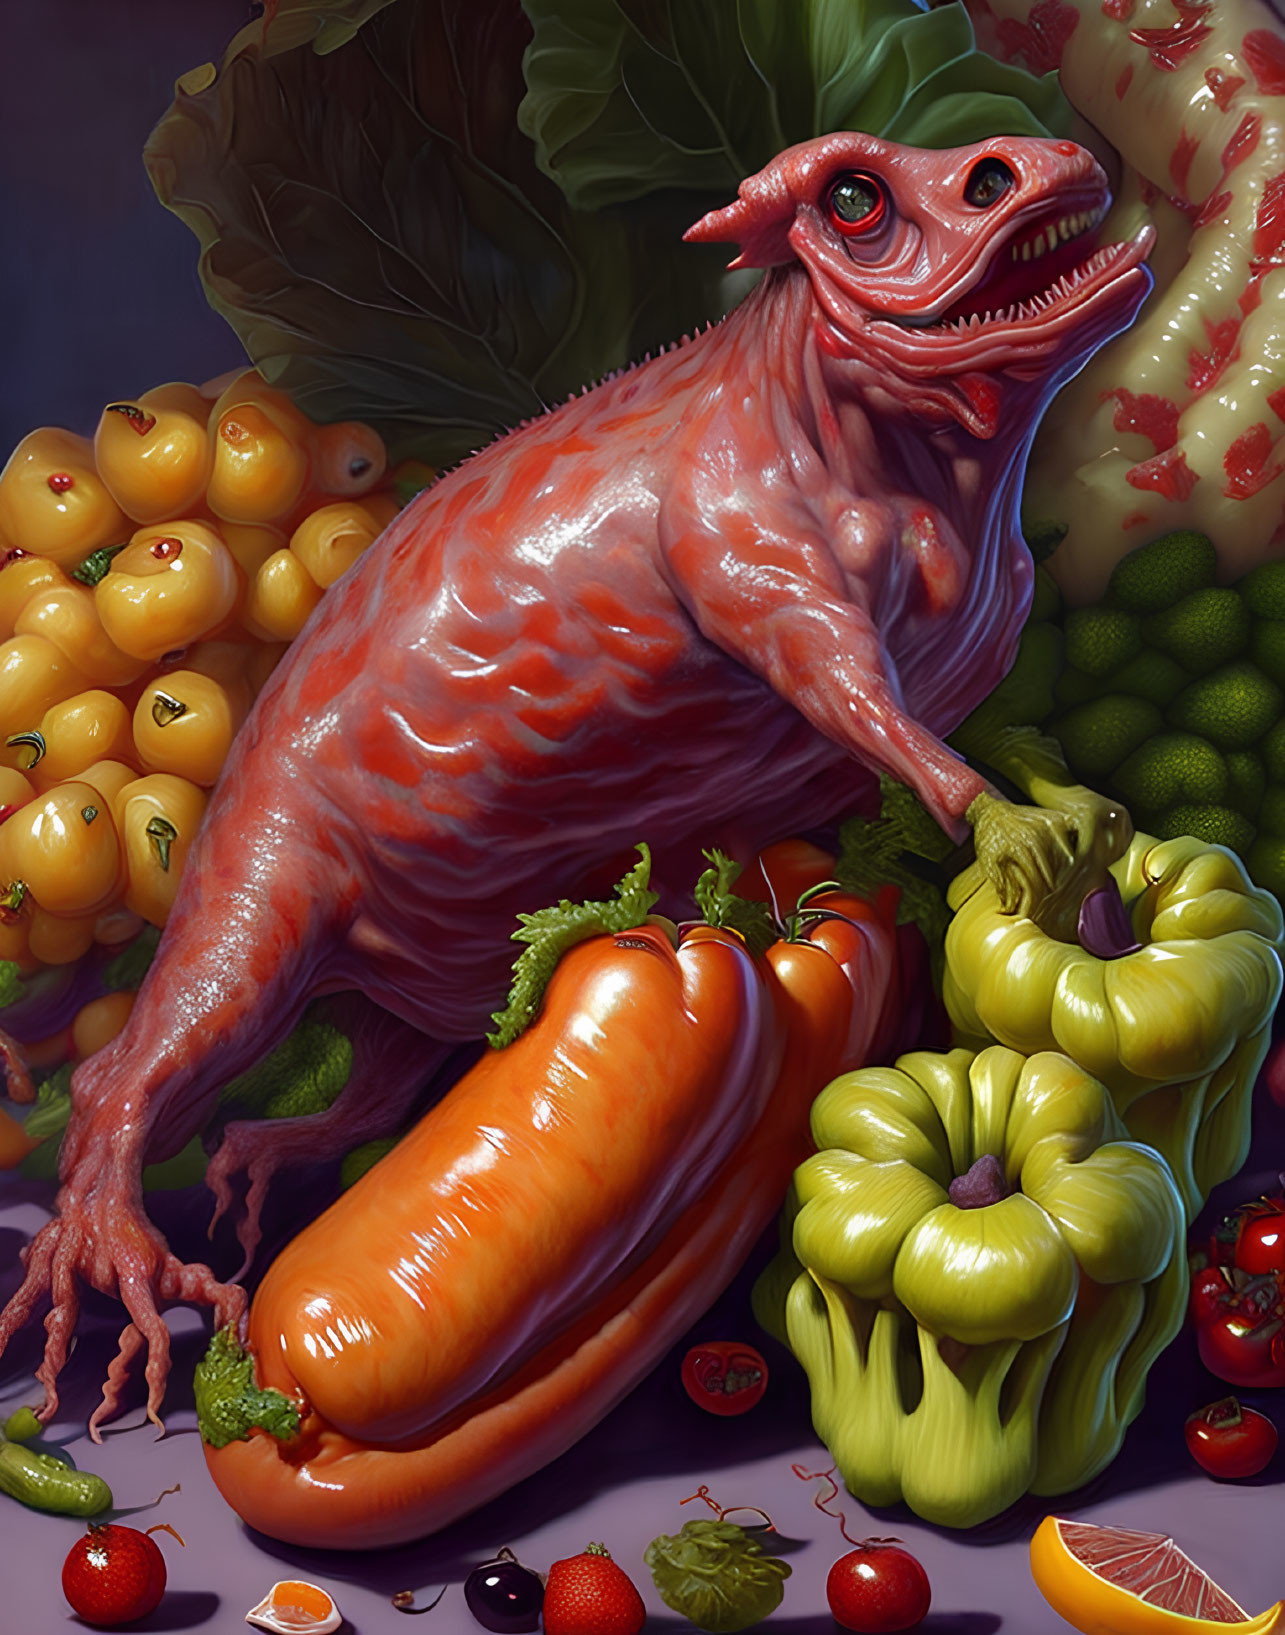 Surreal illustration of raw chicken with oversized eyes among vibrant fruits & vegetables